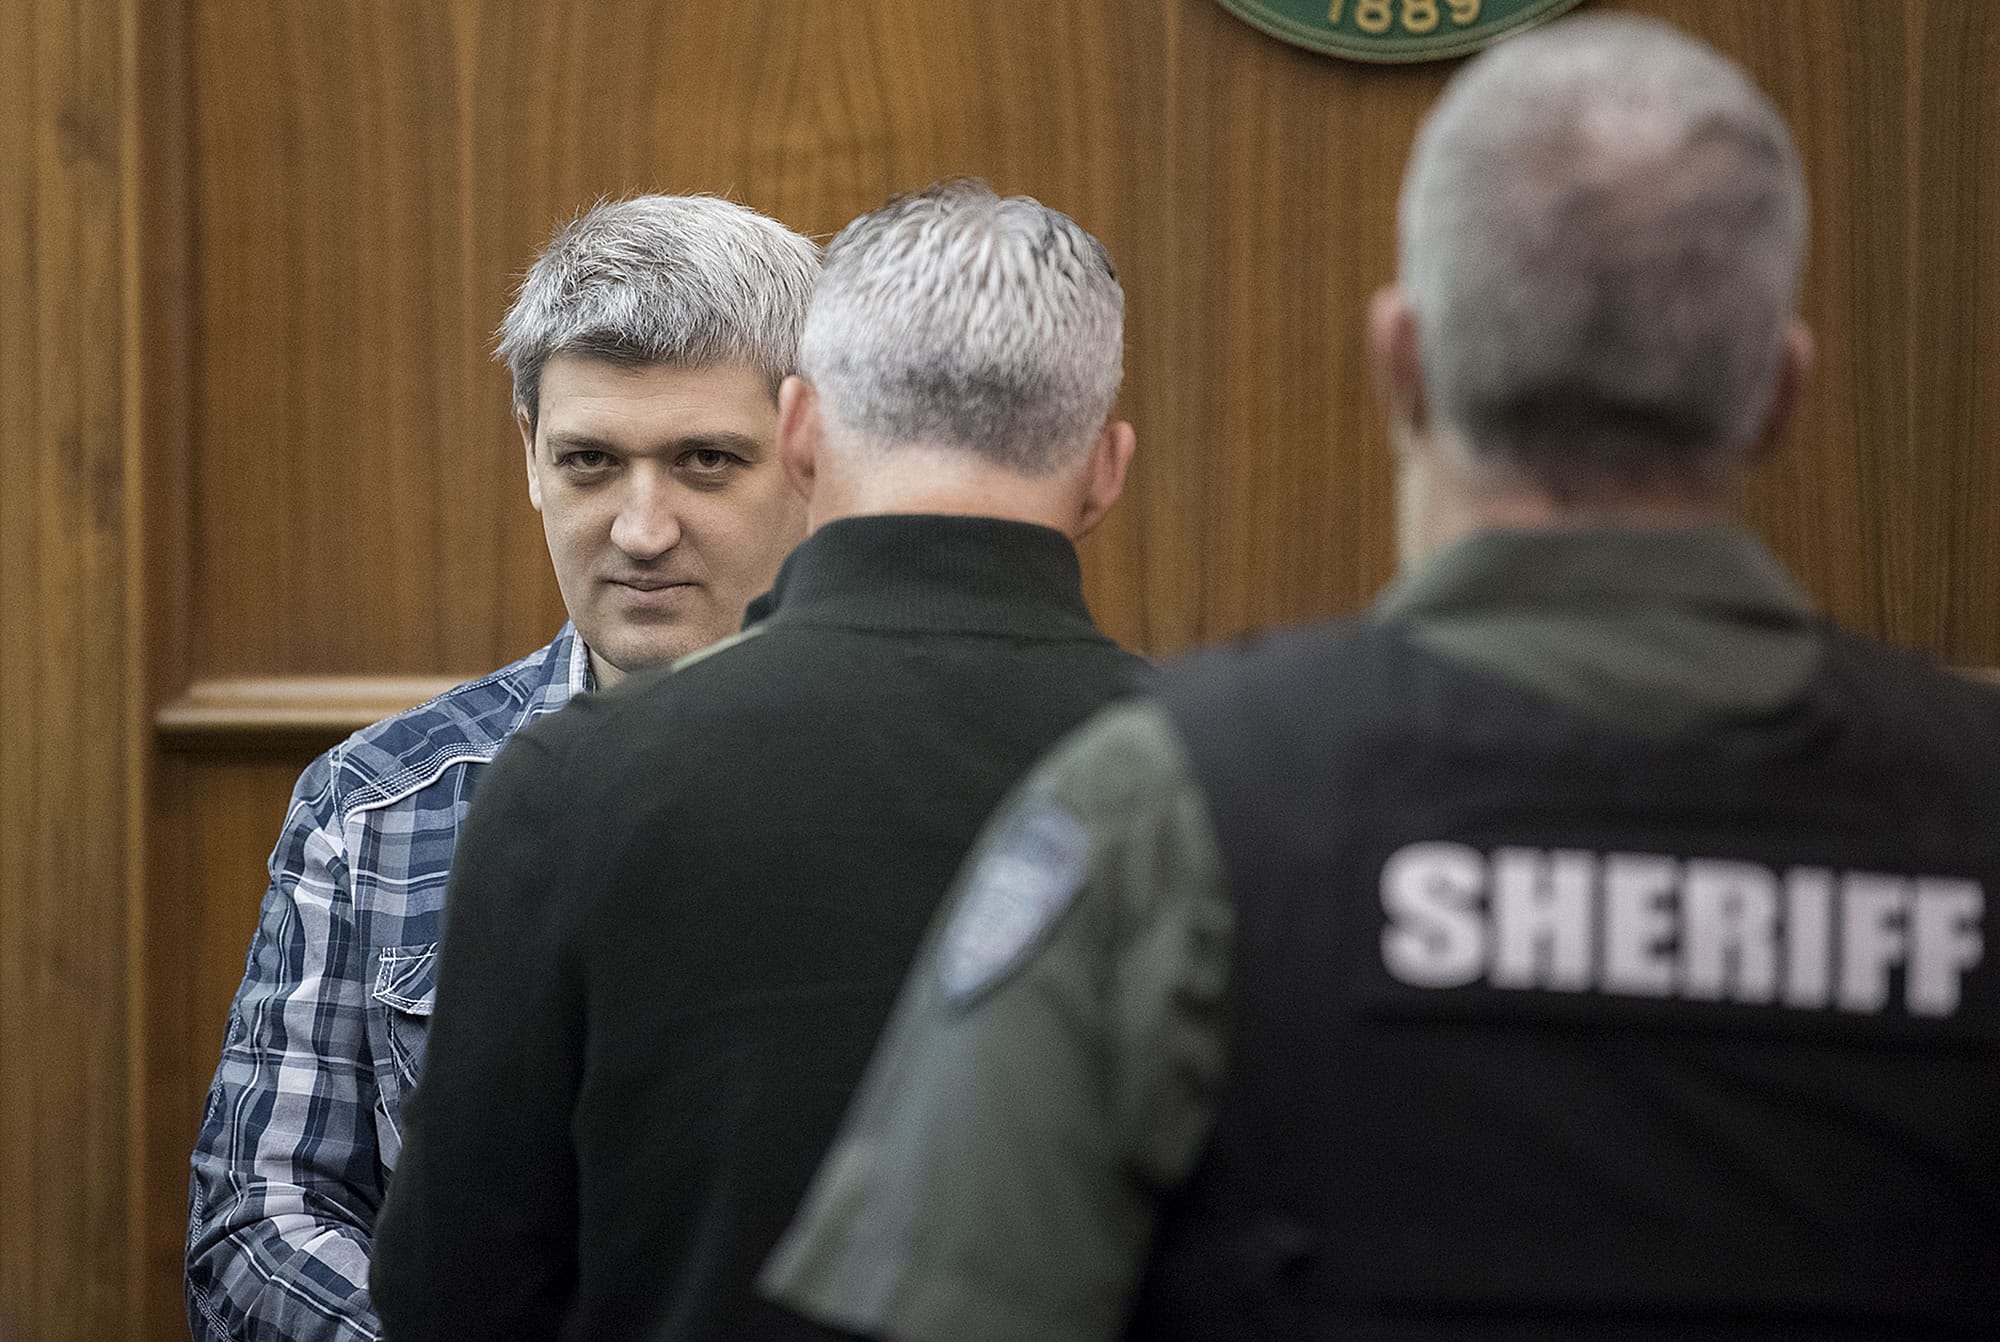 Brent Luyster prepares to be seated during his triple aggravated murder trial in Clark County Superior Court on Monday morning, Nov. 13, 2017.